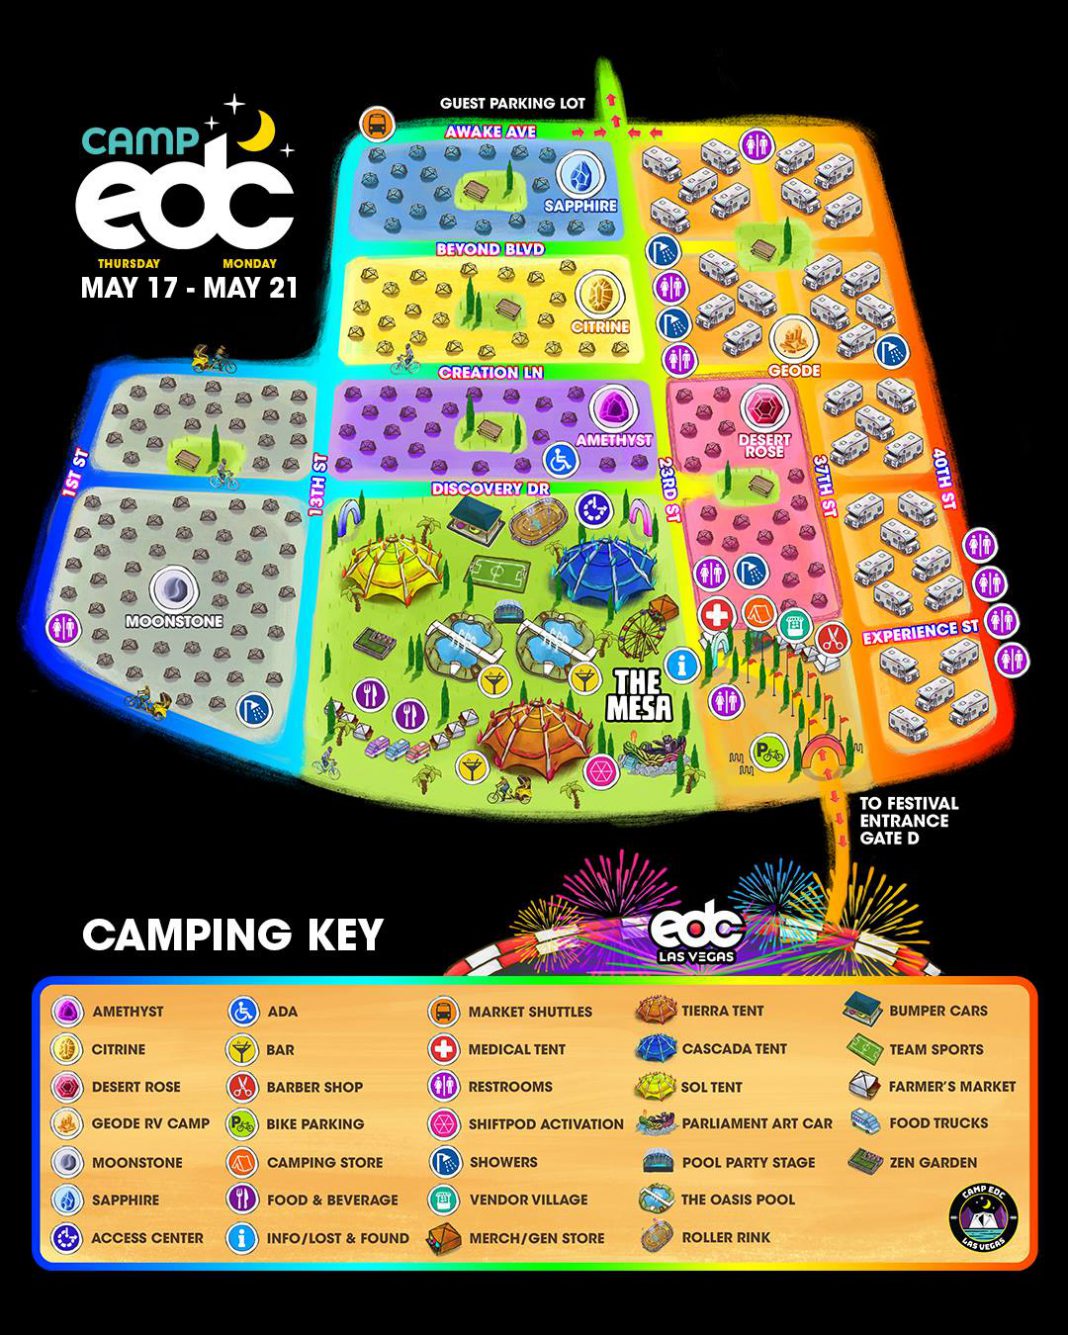 Camp EDC Announces a Ton of Exciting Activities & Amenities! EDM Identity